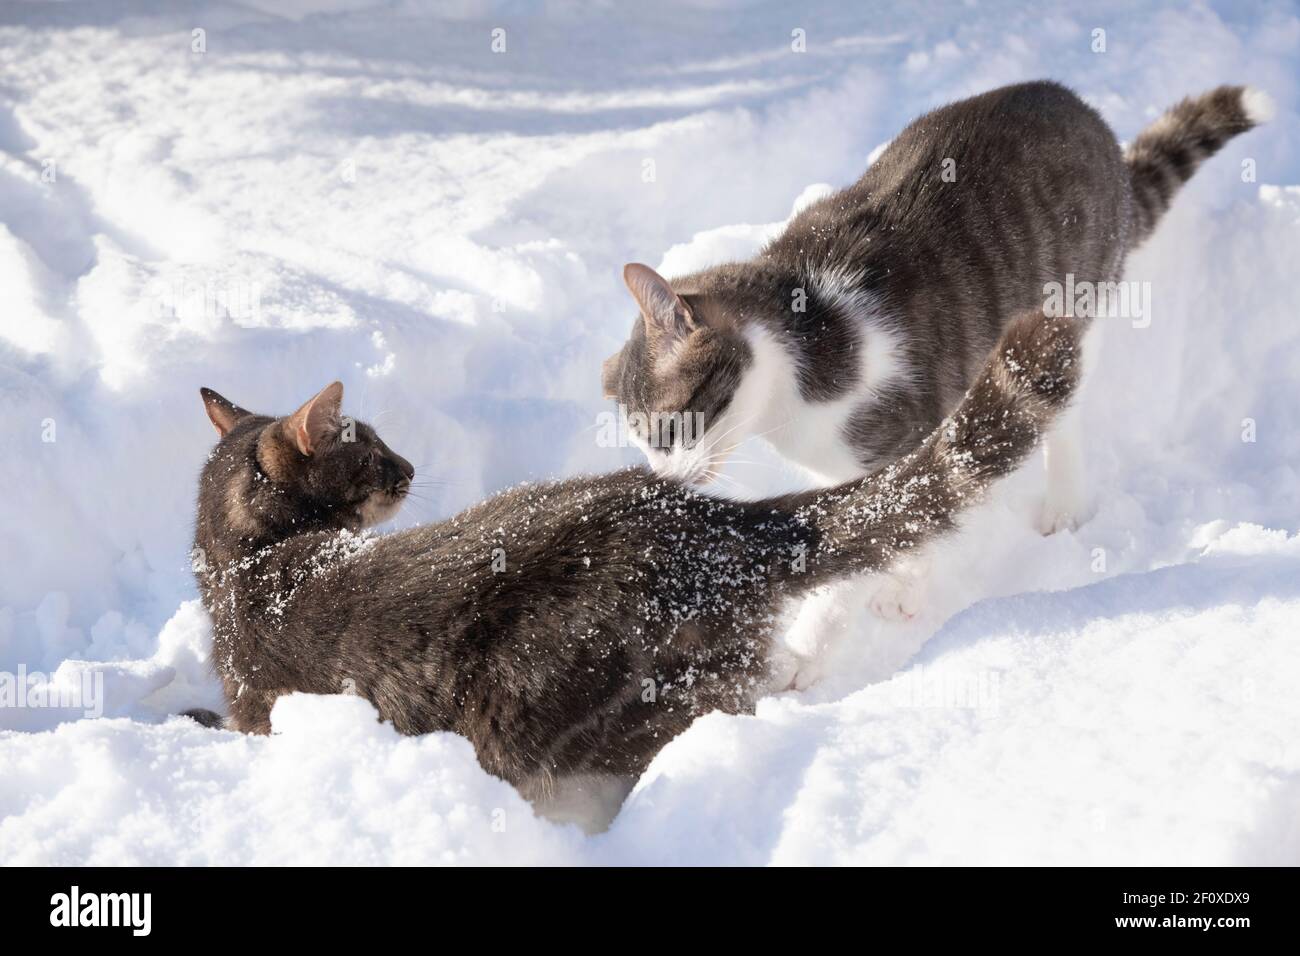 Two Pet Cats, One Grey the Other Grey & White, Playing Together Outdoors in Snow Stock Photo